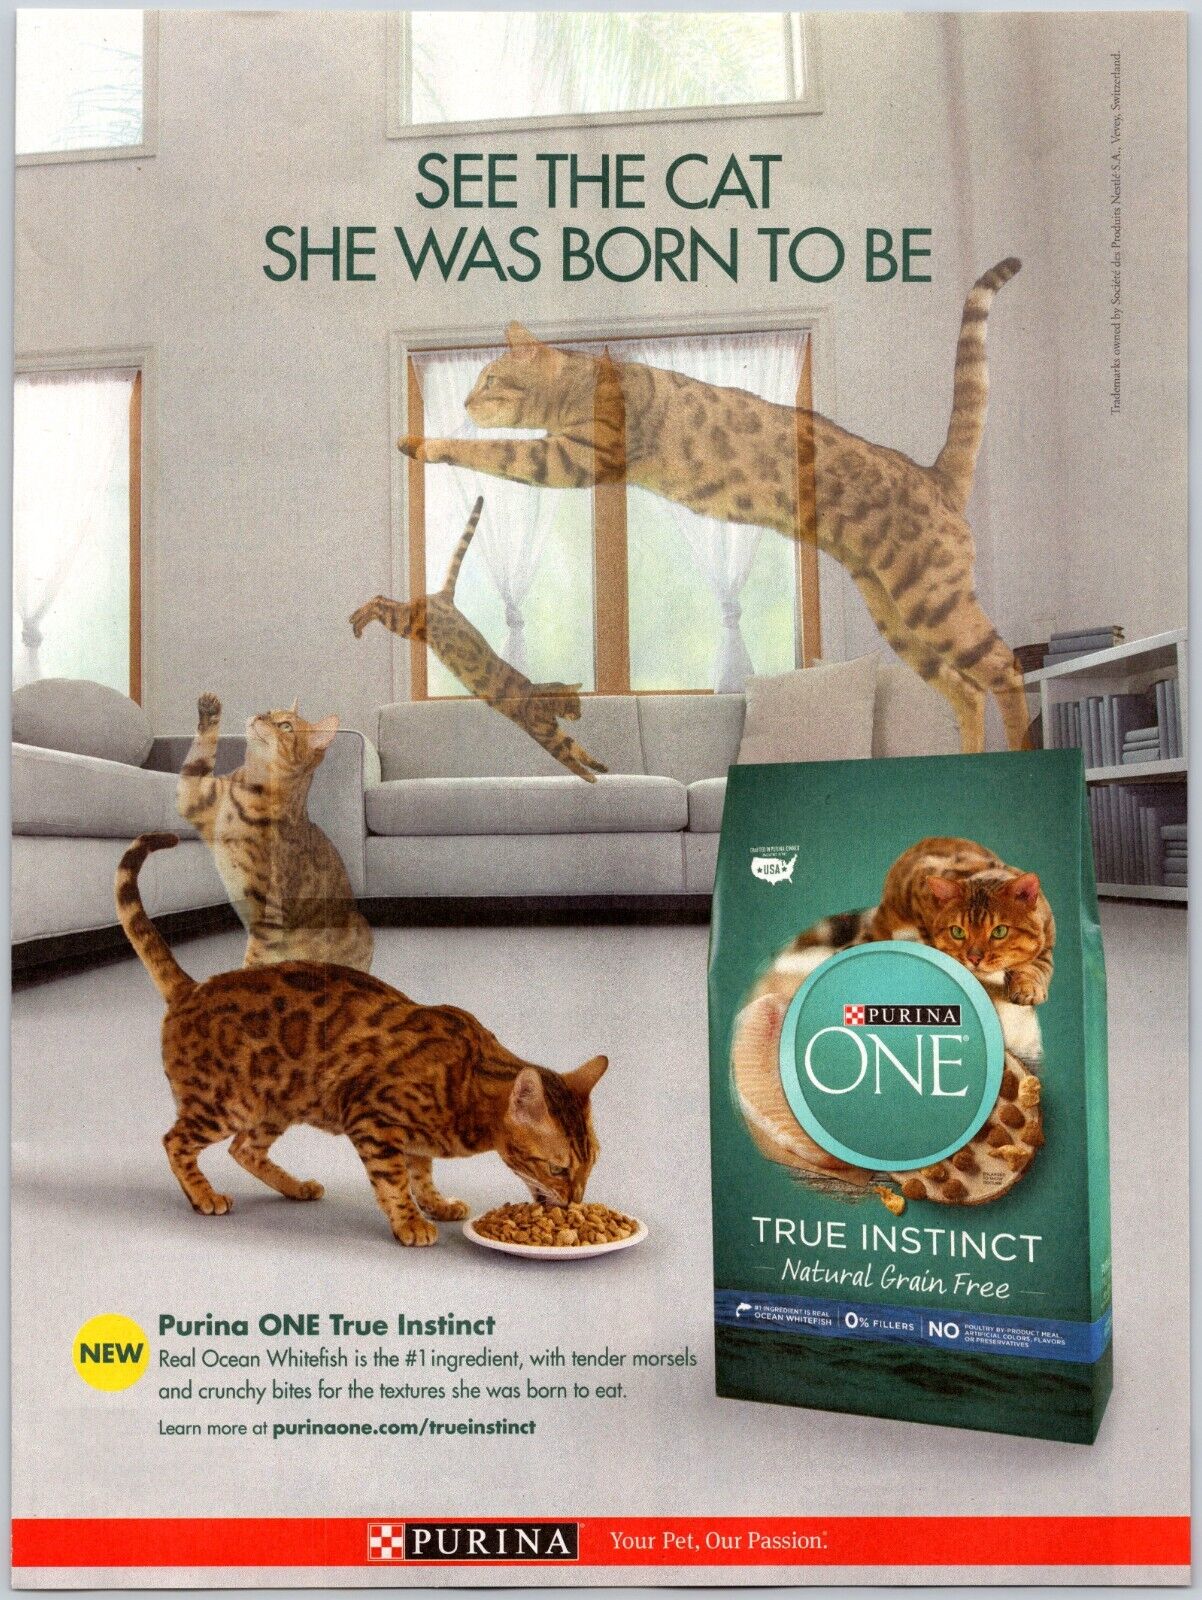 2018 Purina One True Instinct Cat Food Natural Grain Free Cats Leaping Print Ad